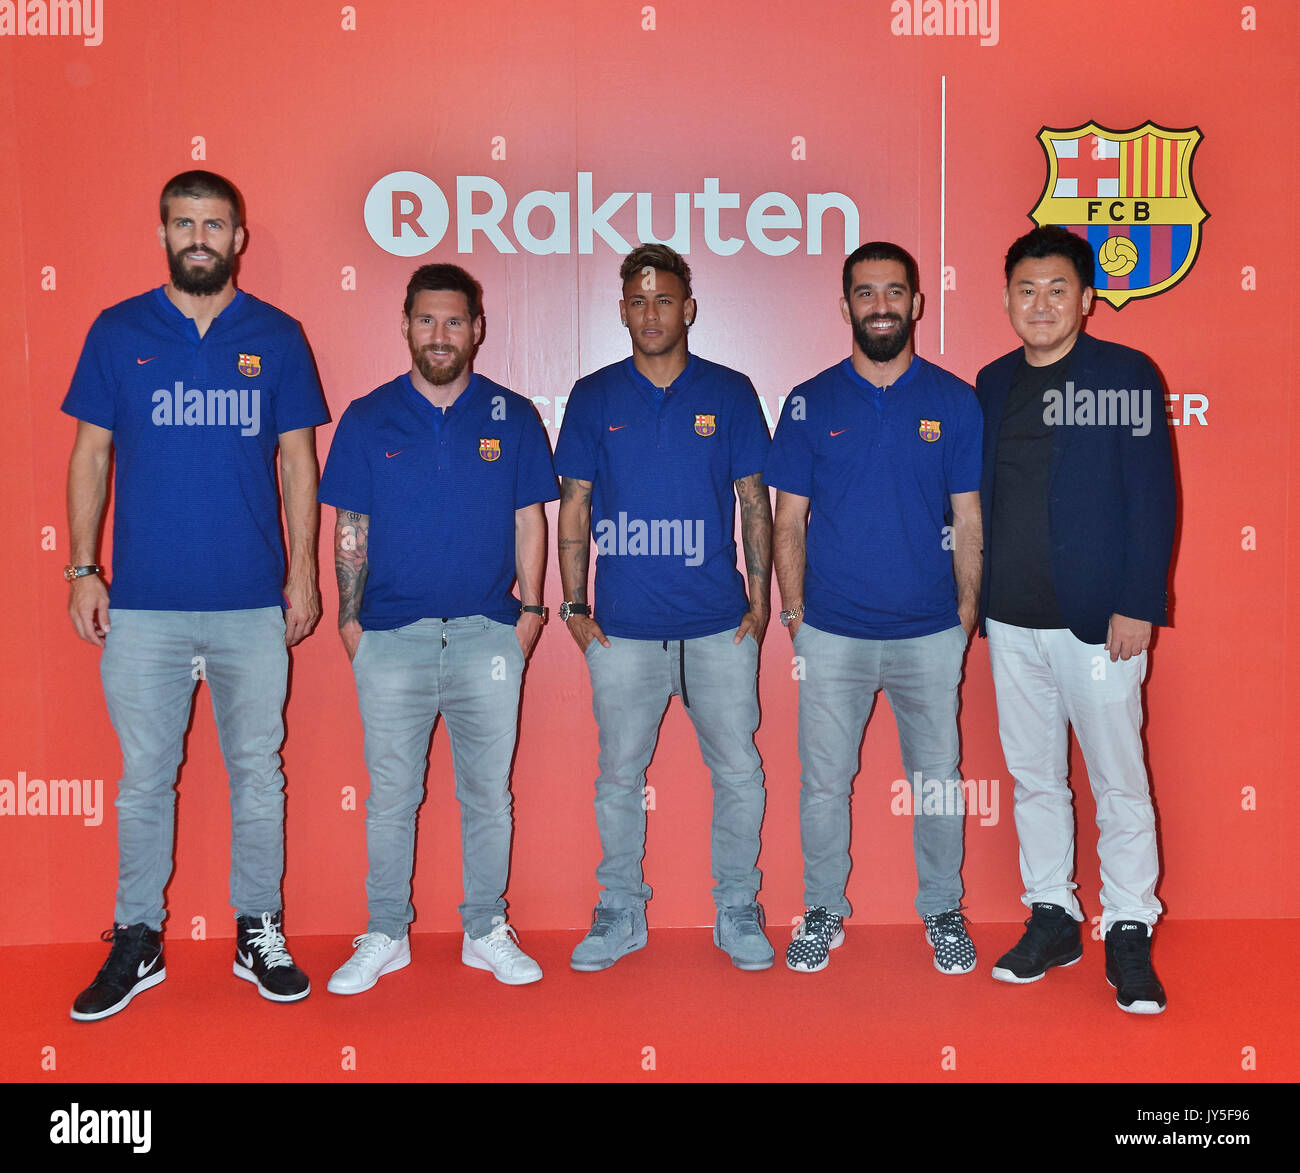 Rakuten, FC Barcelona, Gerard Pique, Lionel Messi, Neymar Jr, Arda Turan, Hiroshi Mikitani, July 13, 2017, Tokyo, Japan : (L-R) Gerard Pique, Lionel Messi, Neymar Jr, Arda Turan and CEO of Rakuten, Inc, Hiroshi Mikitani pose for camera during the reception party for Rakuten - FC Barcelona Global Partnership Launch at the Hotel New Otani in Tokyo, Japan on July 13, 2017. Credit: AFLO/Alamy Live News Stock Photo